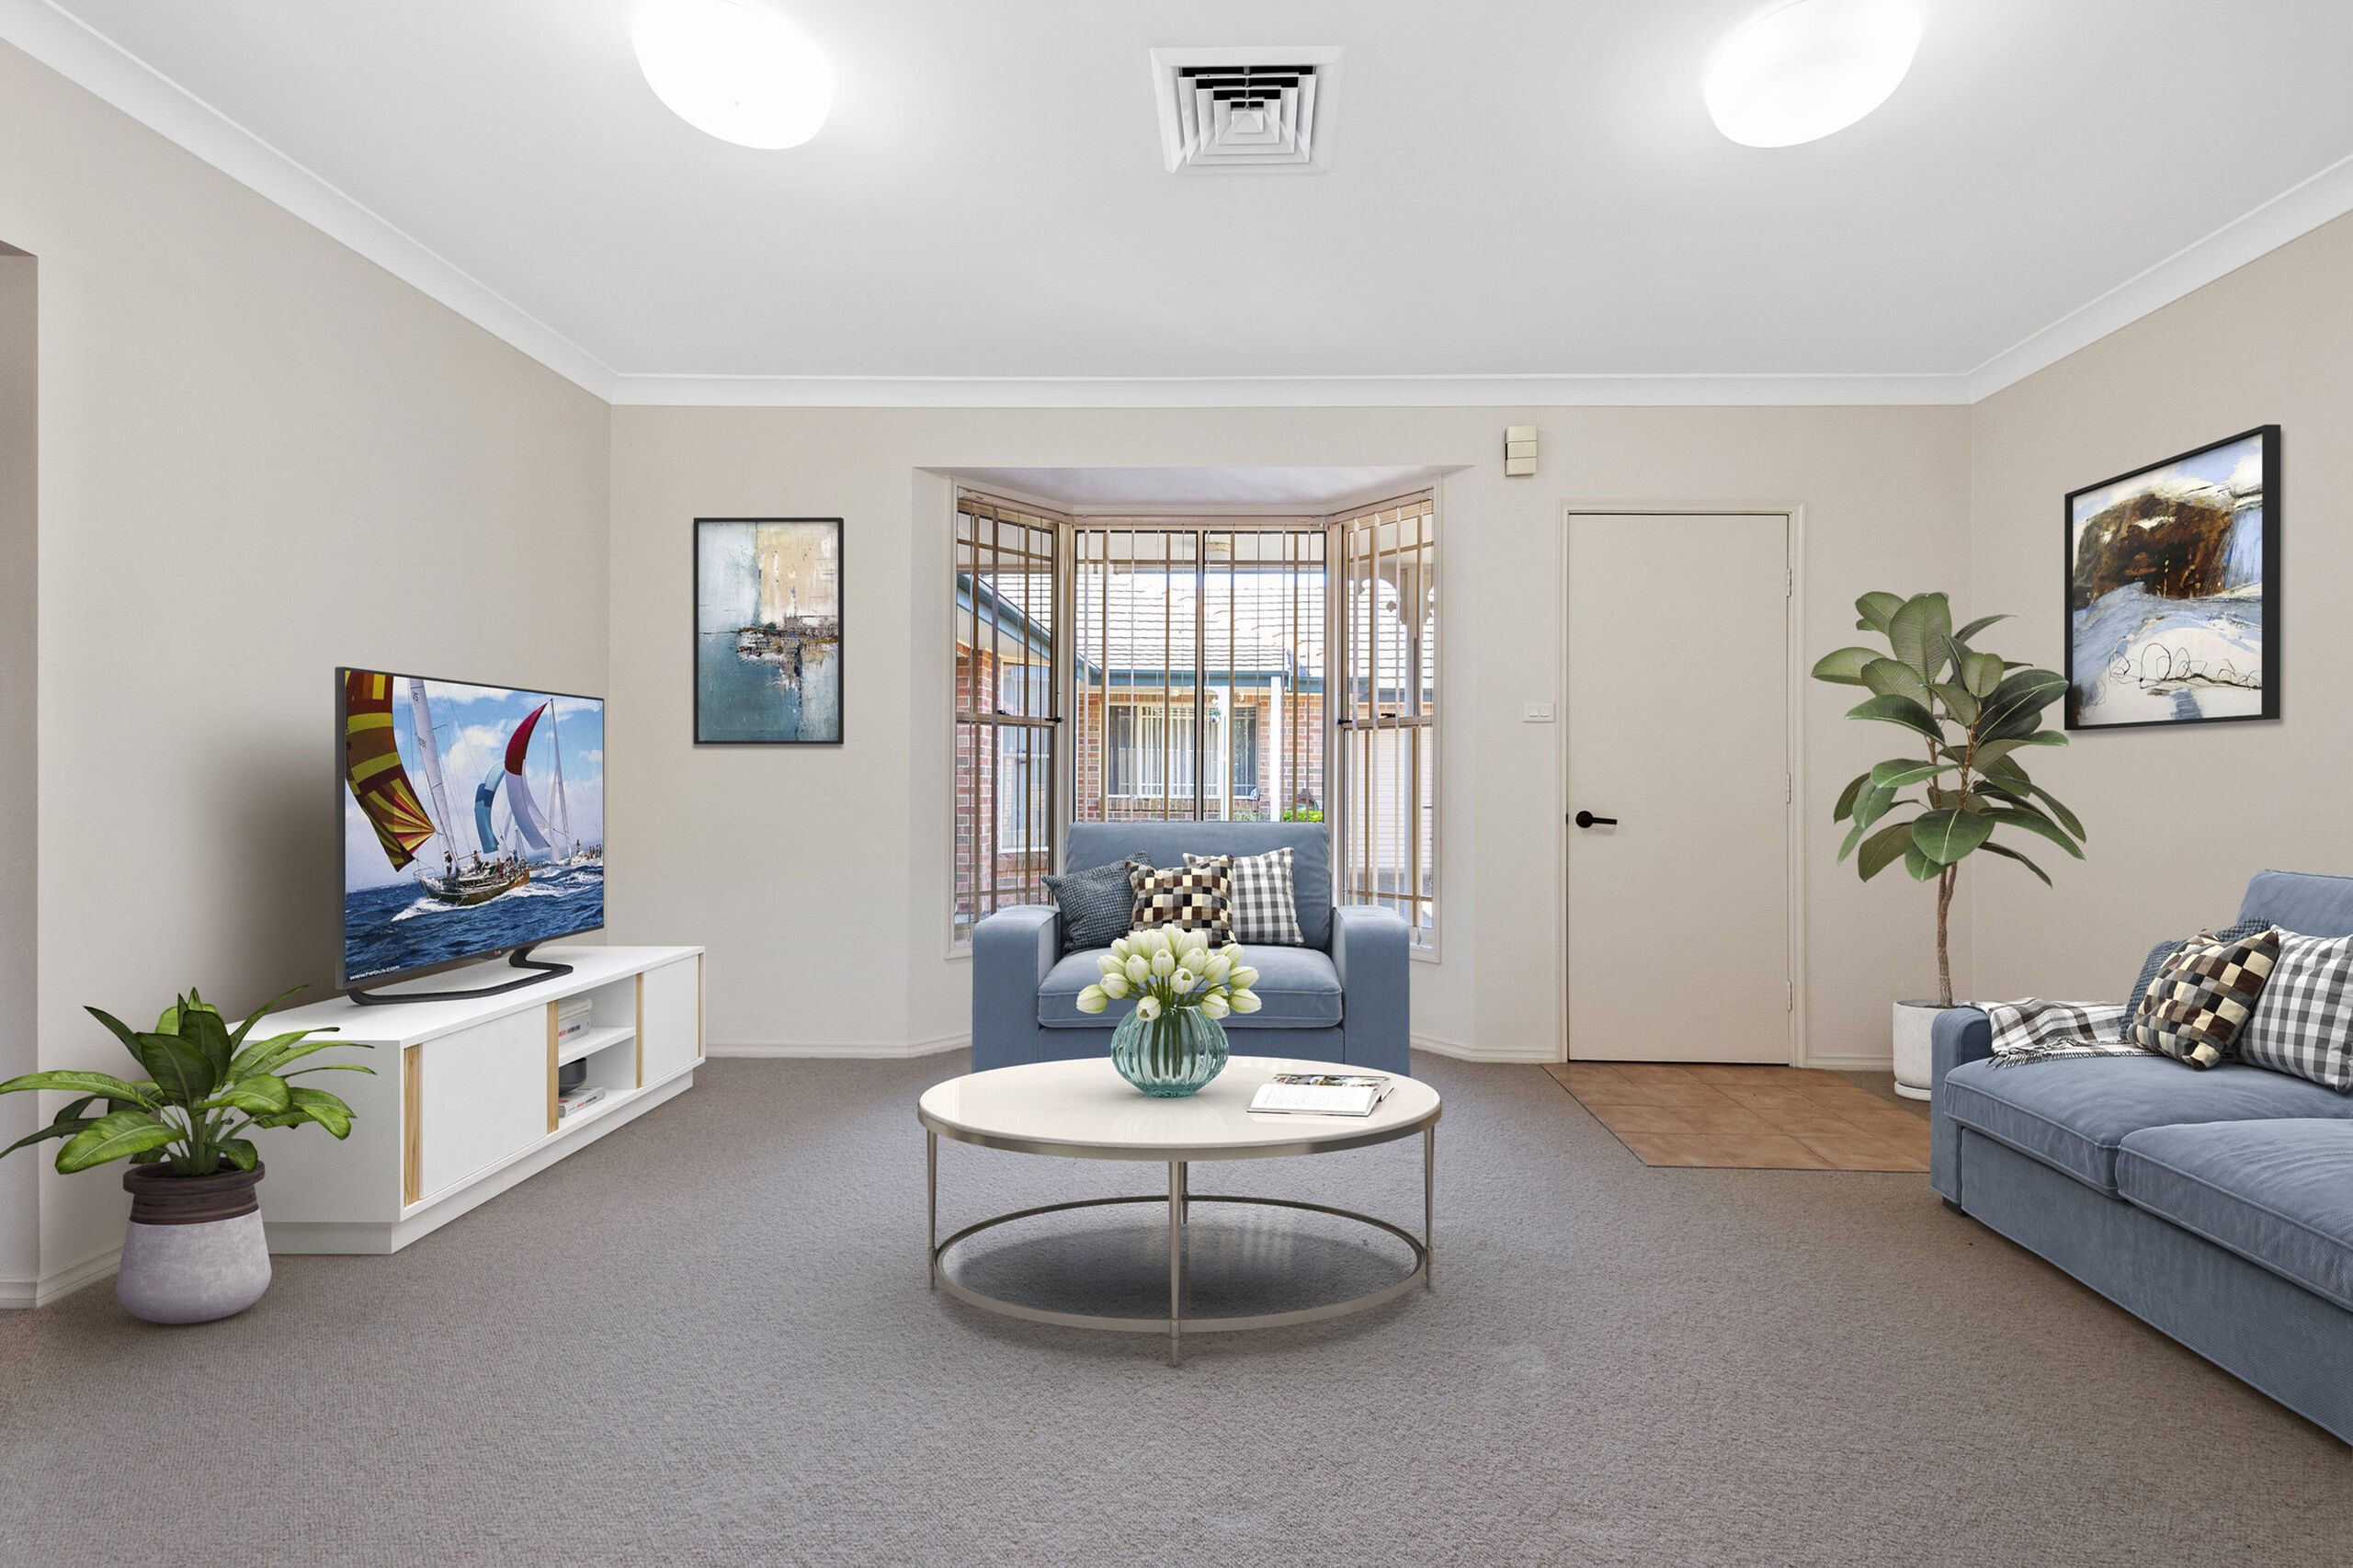 large spacious living room in a 2 bedroom home at the over 55s baptistcare All Saints retirement village in New Lambton Newcastle